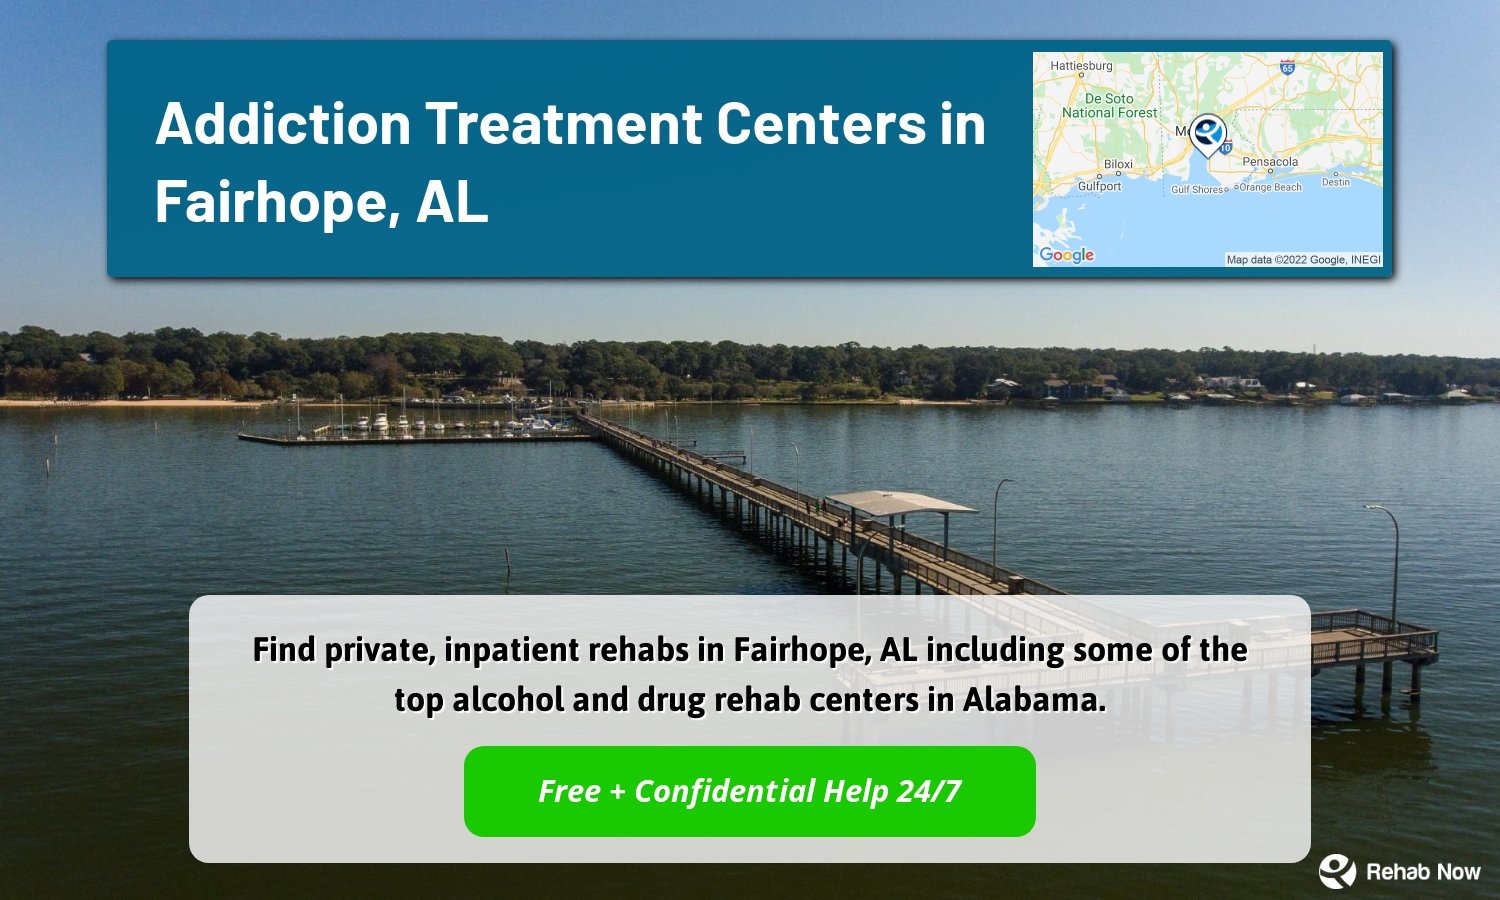 Find private, inpatient rehabs in Fairhope, AL including some of the top alcohol and drug rehab centers in Alabama.